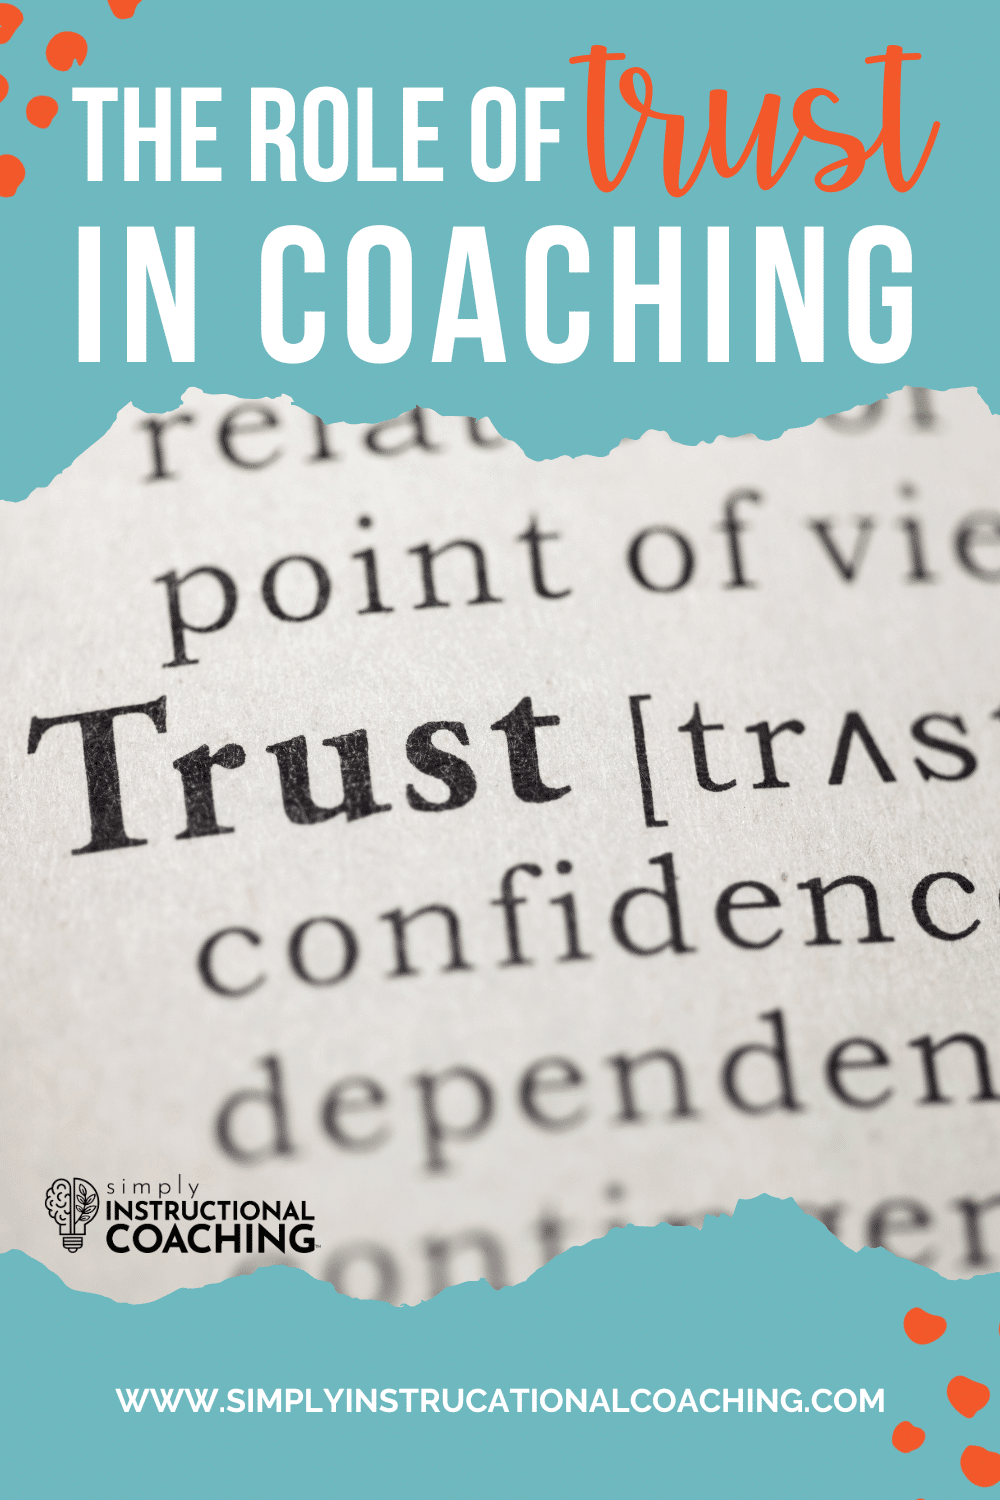 The role of trust in instructional coaching